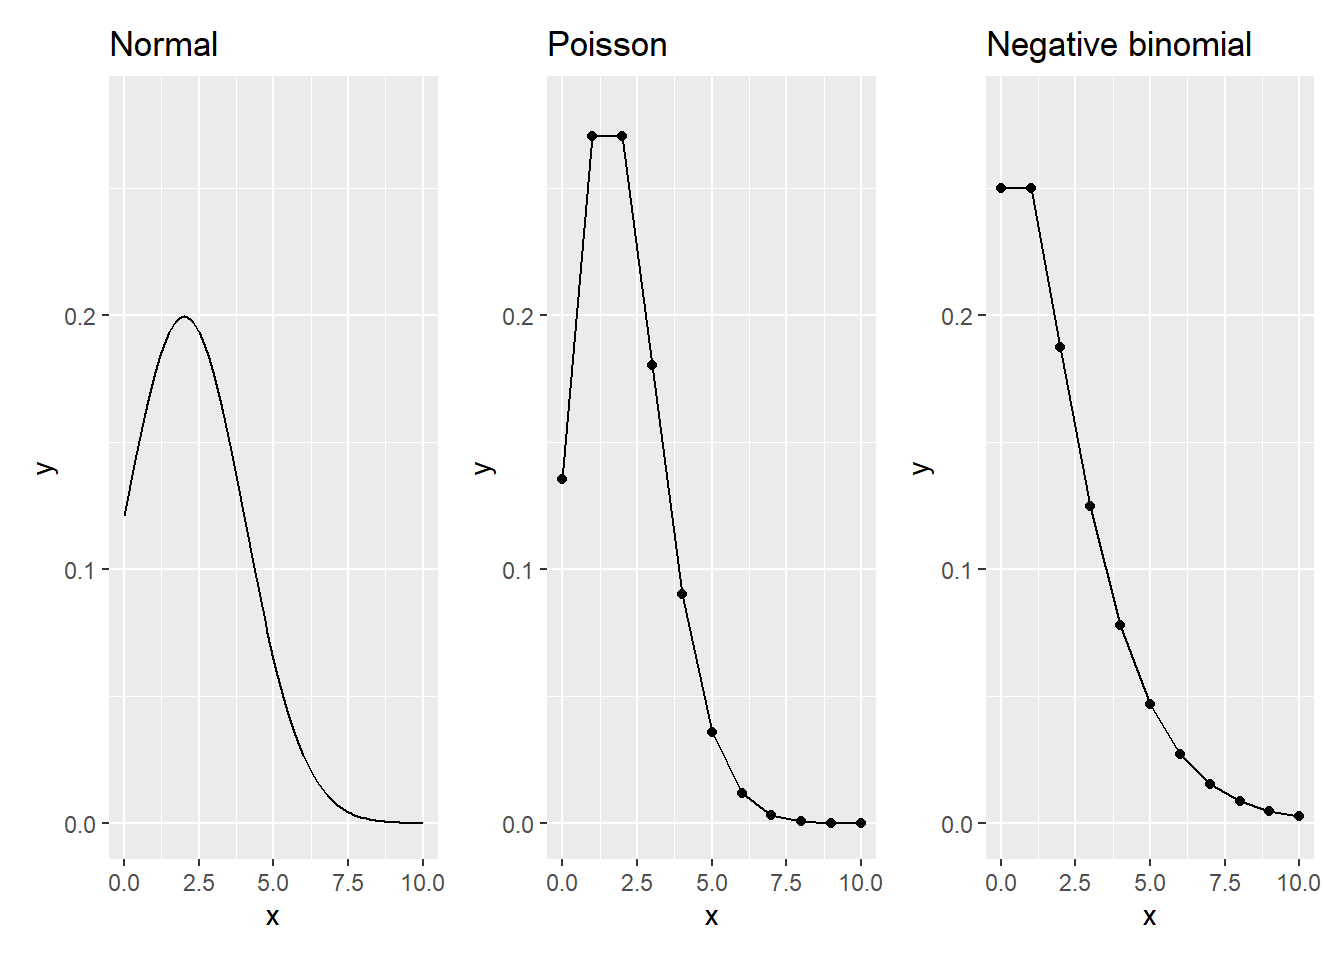 The normal, Poisson, and negative binomial distributions with a mean of 2 and variance of 2. (Dispersion parameter set to 0.5 for negative binomial.)